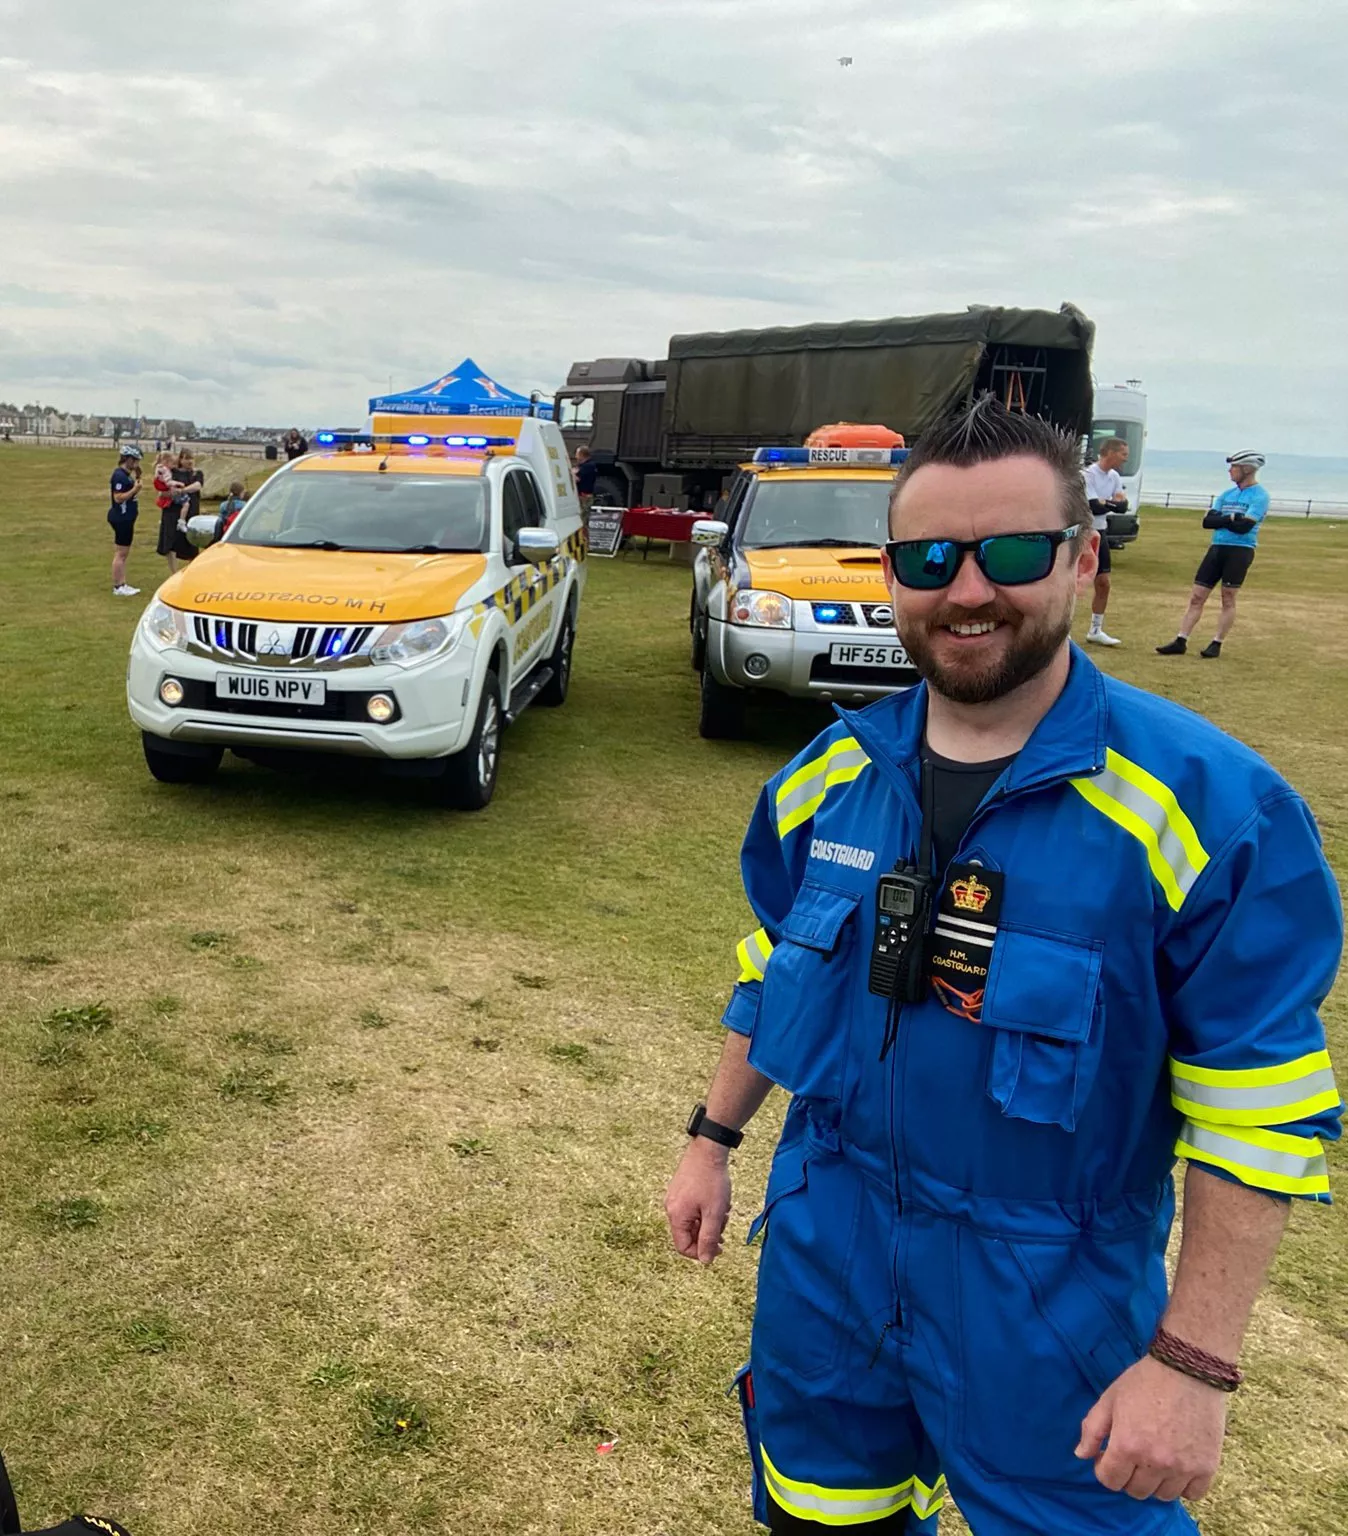 Kev Paterson stood in front of two Coastguard Rescue Vehicles